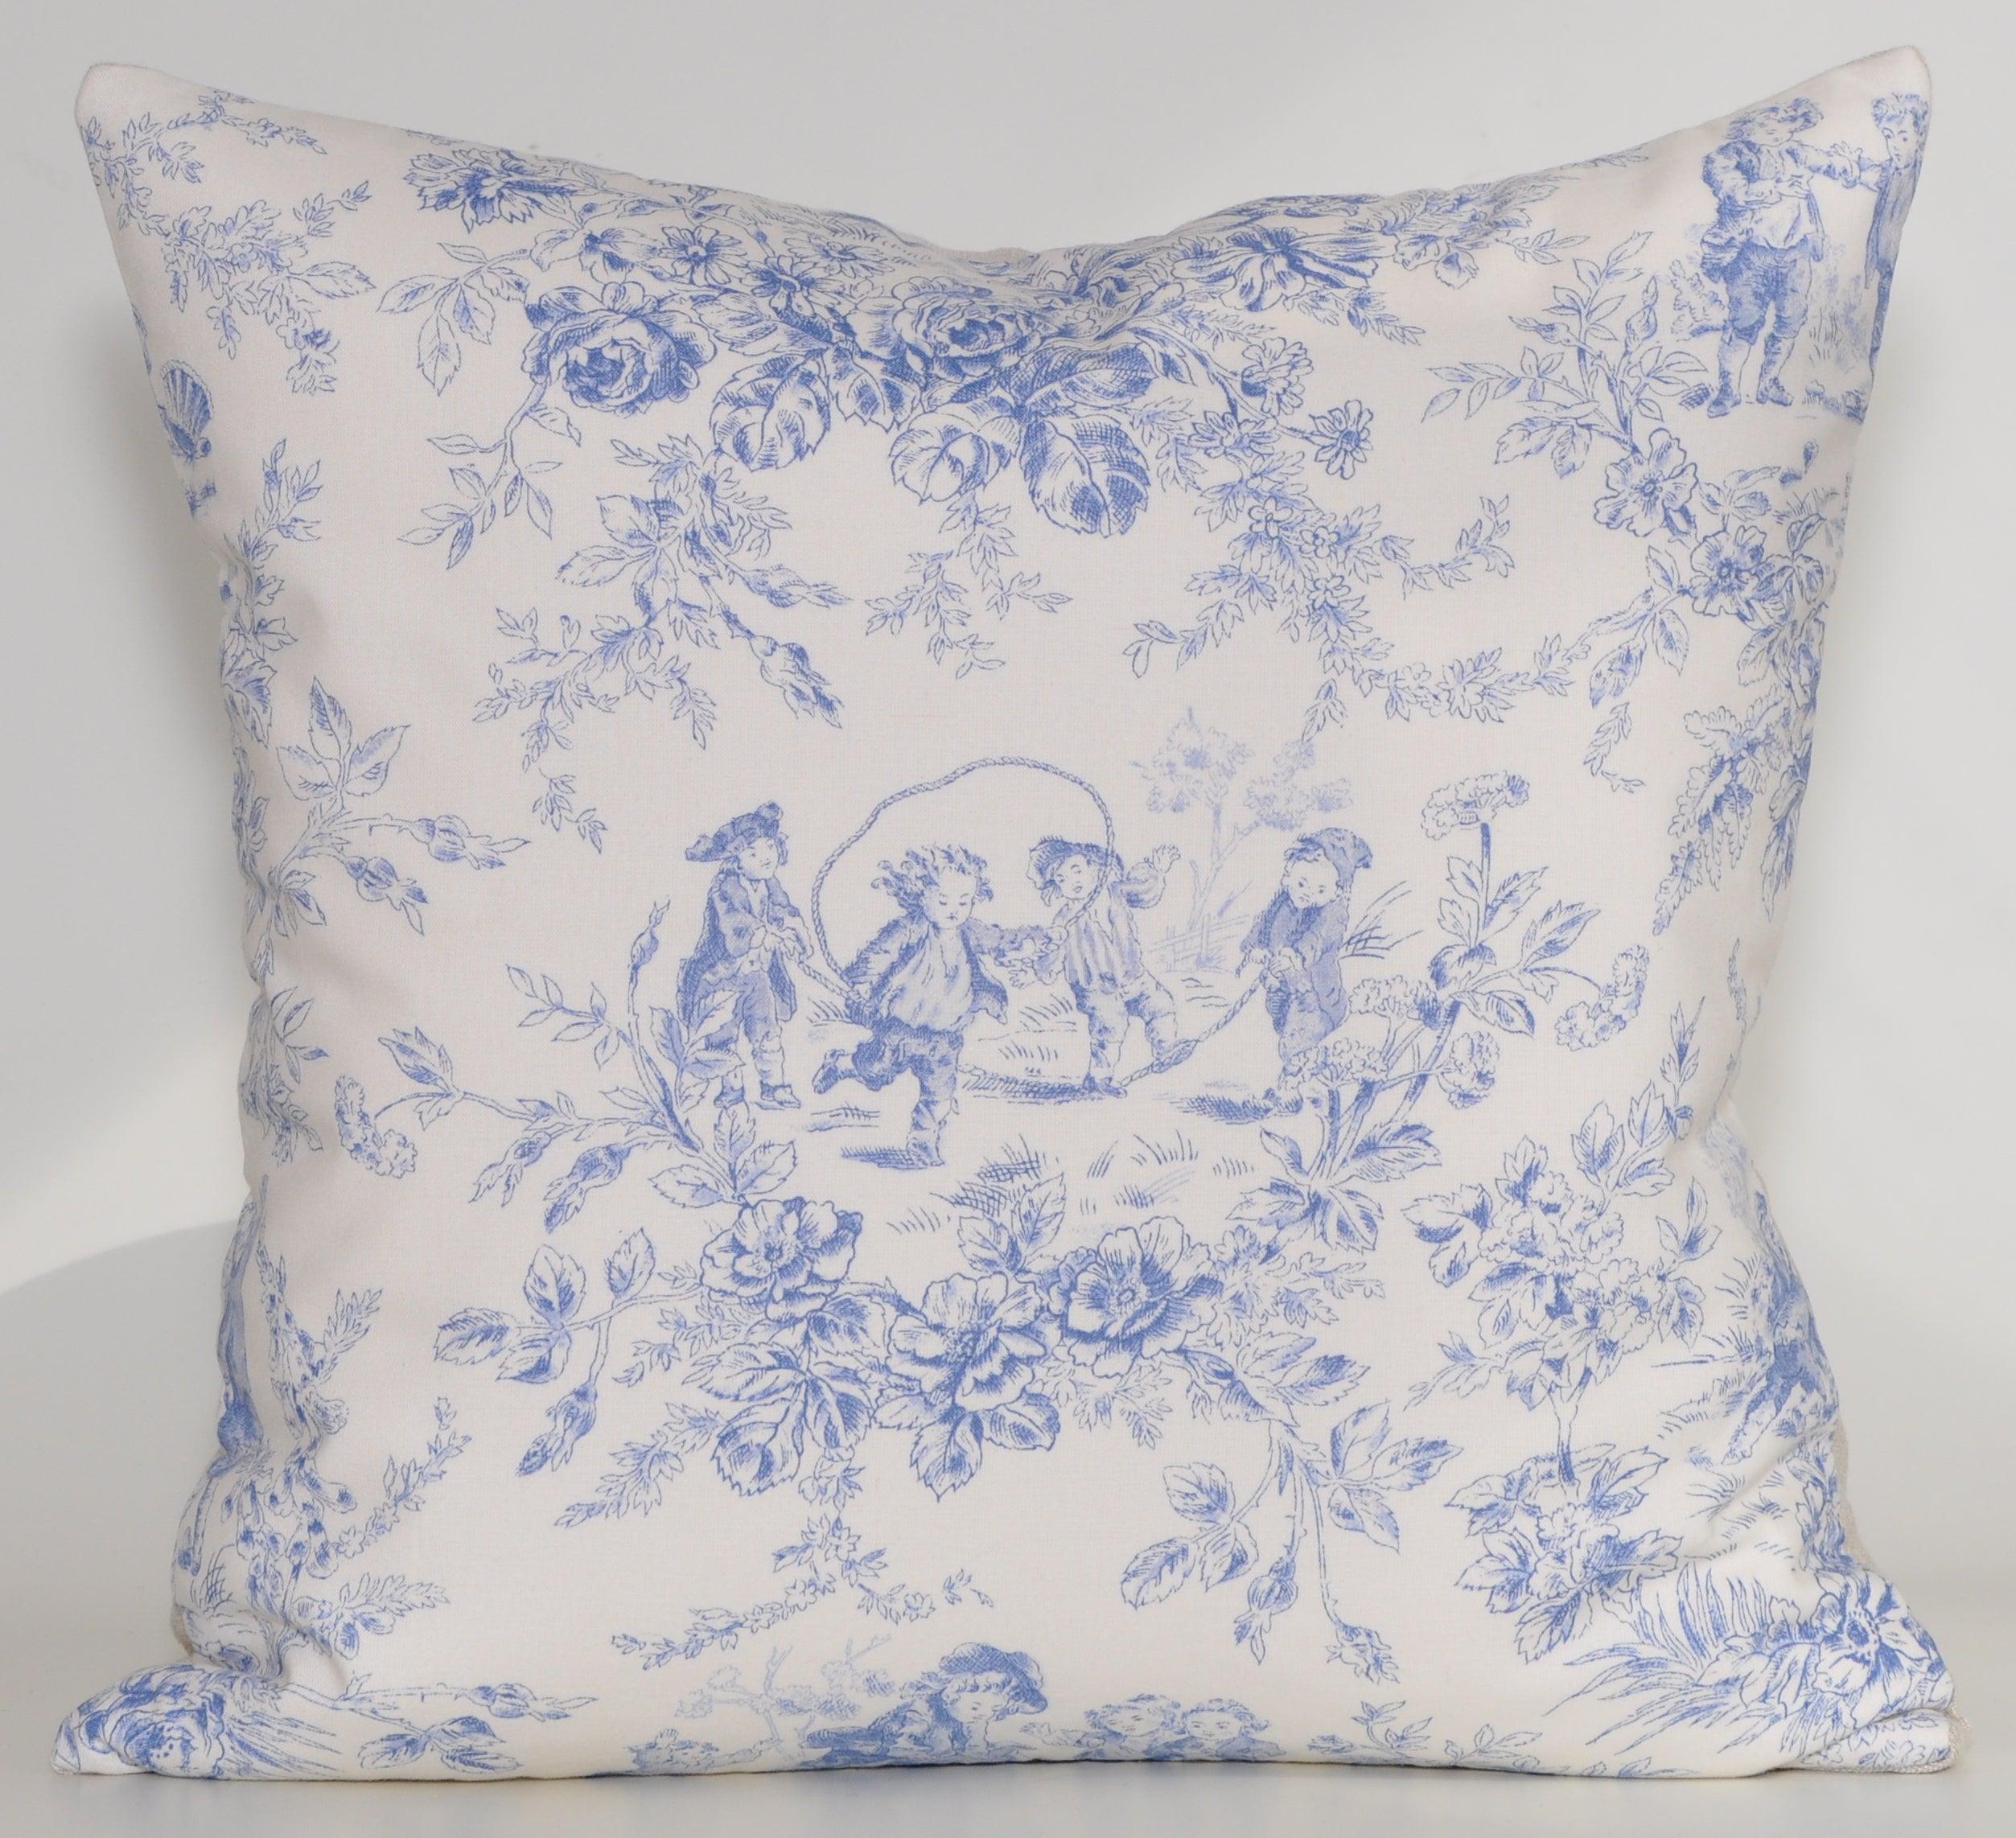 Vintage French blue 'Toile De Jouy' cushions pillows with in Irish Linen

Custom made one-of-a-kind luxury pair of cushions (pillows) set created from vintage fabric of an antique 'Toile de Jouy' design in delicate cotton. Purchased at ‘Marché Paul